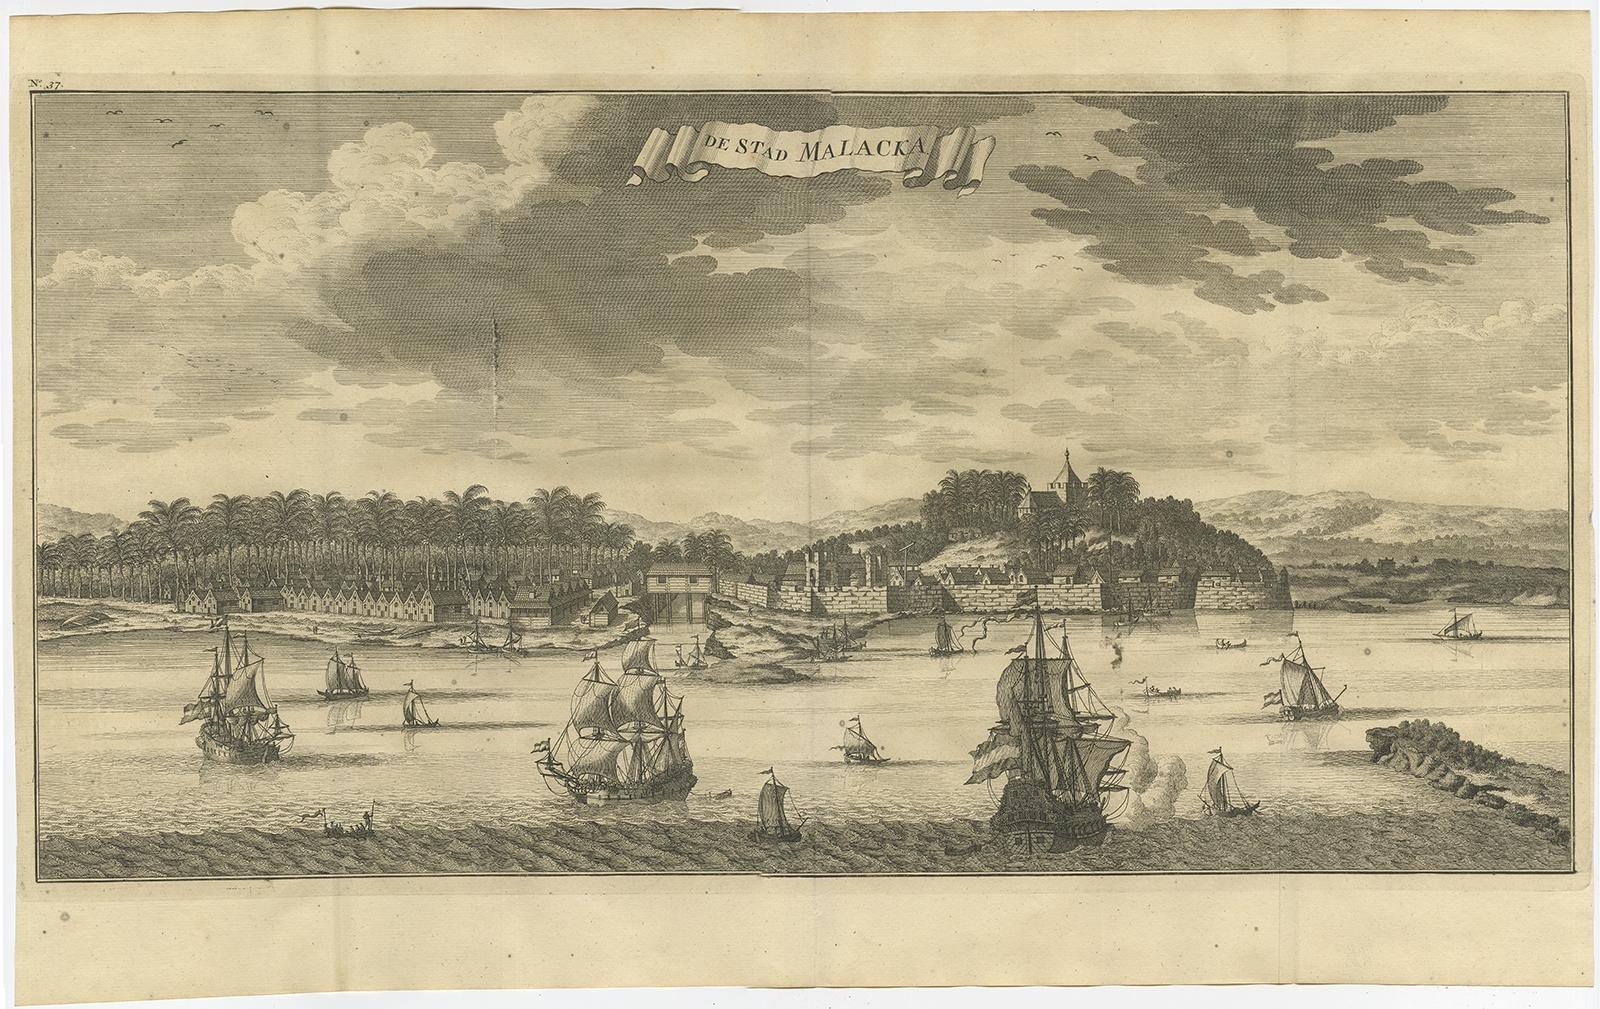 Antique print Malaysia titled 'De Stad Malacka'. 

Decorative panoramic view of the town of Malacca with European vessels in the foreground. The old Church of St. Paul's on the hill in the fortified old town to the right of the river is clearly